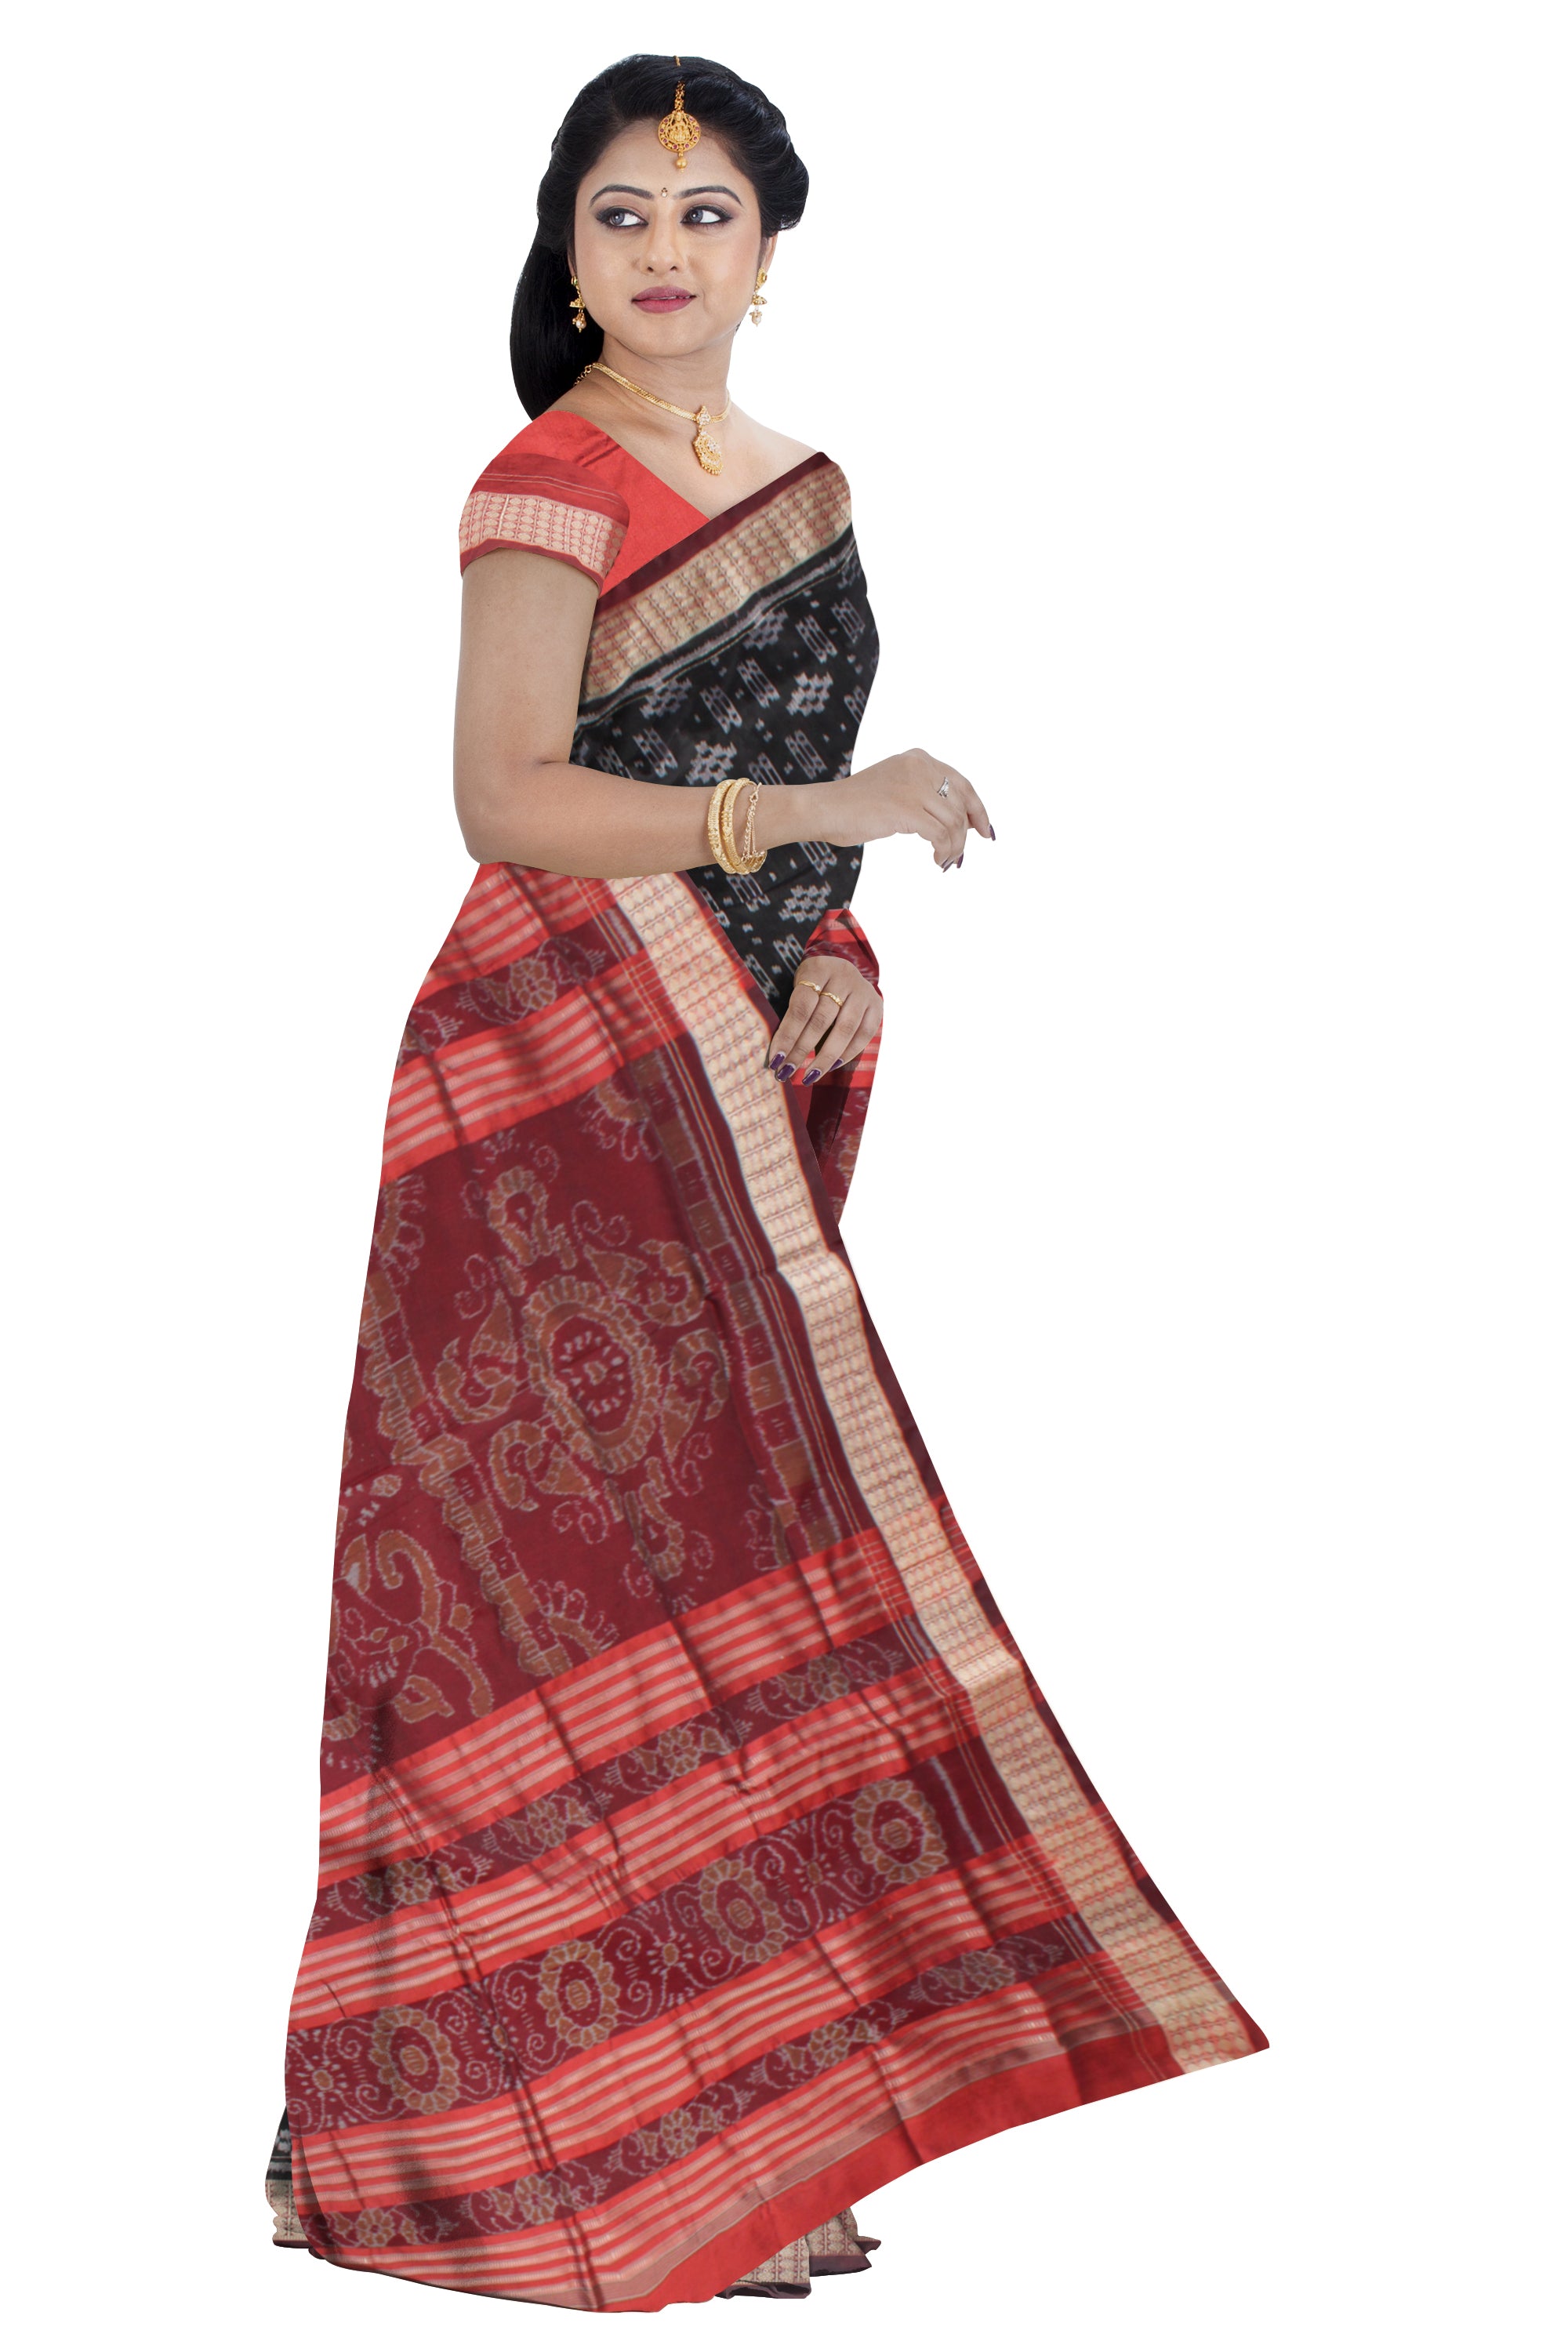 TRADITIONAL FULL BODY PASAPALI DESIGN PATA SAREE IS BLACK AND MAROON COLOR BASE,WITH MATCHING BLOUSE PIECE. - Koshali Arts & Crafts Enterprise